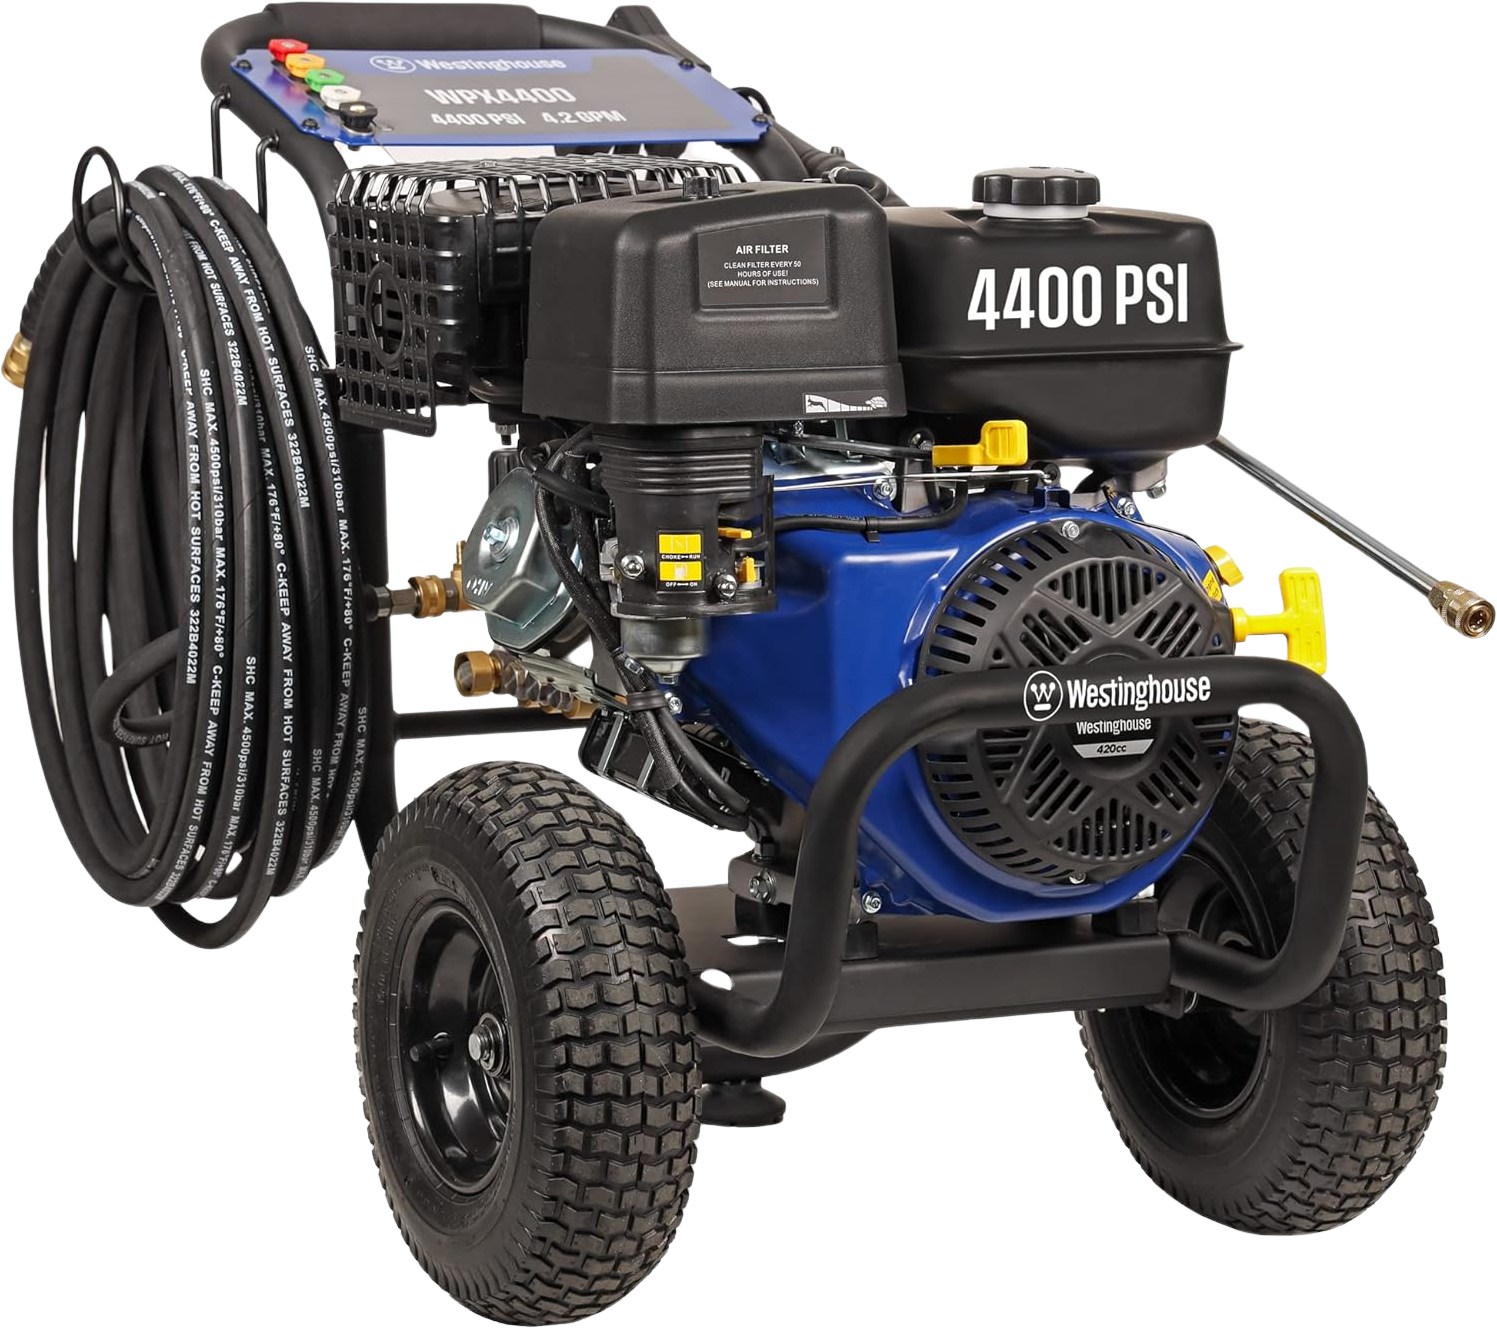 Westinghouse WPX4400 Pressure Washer 4400 PSI 4.2 GPM Gas New